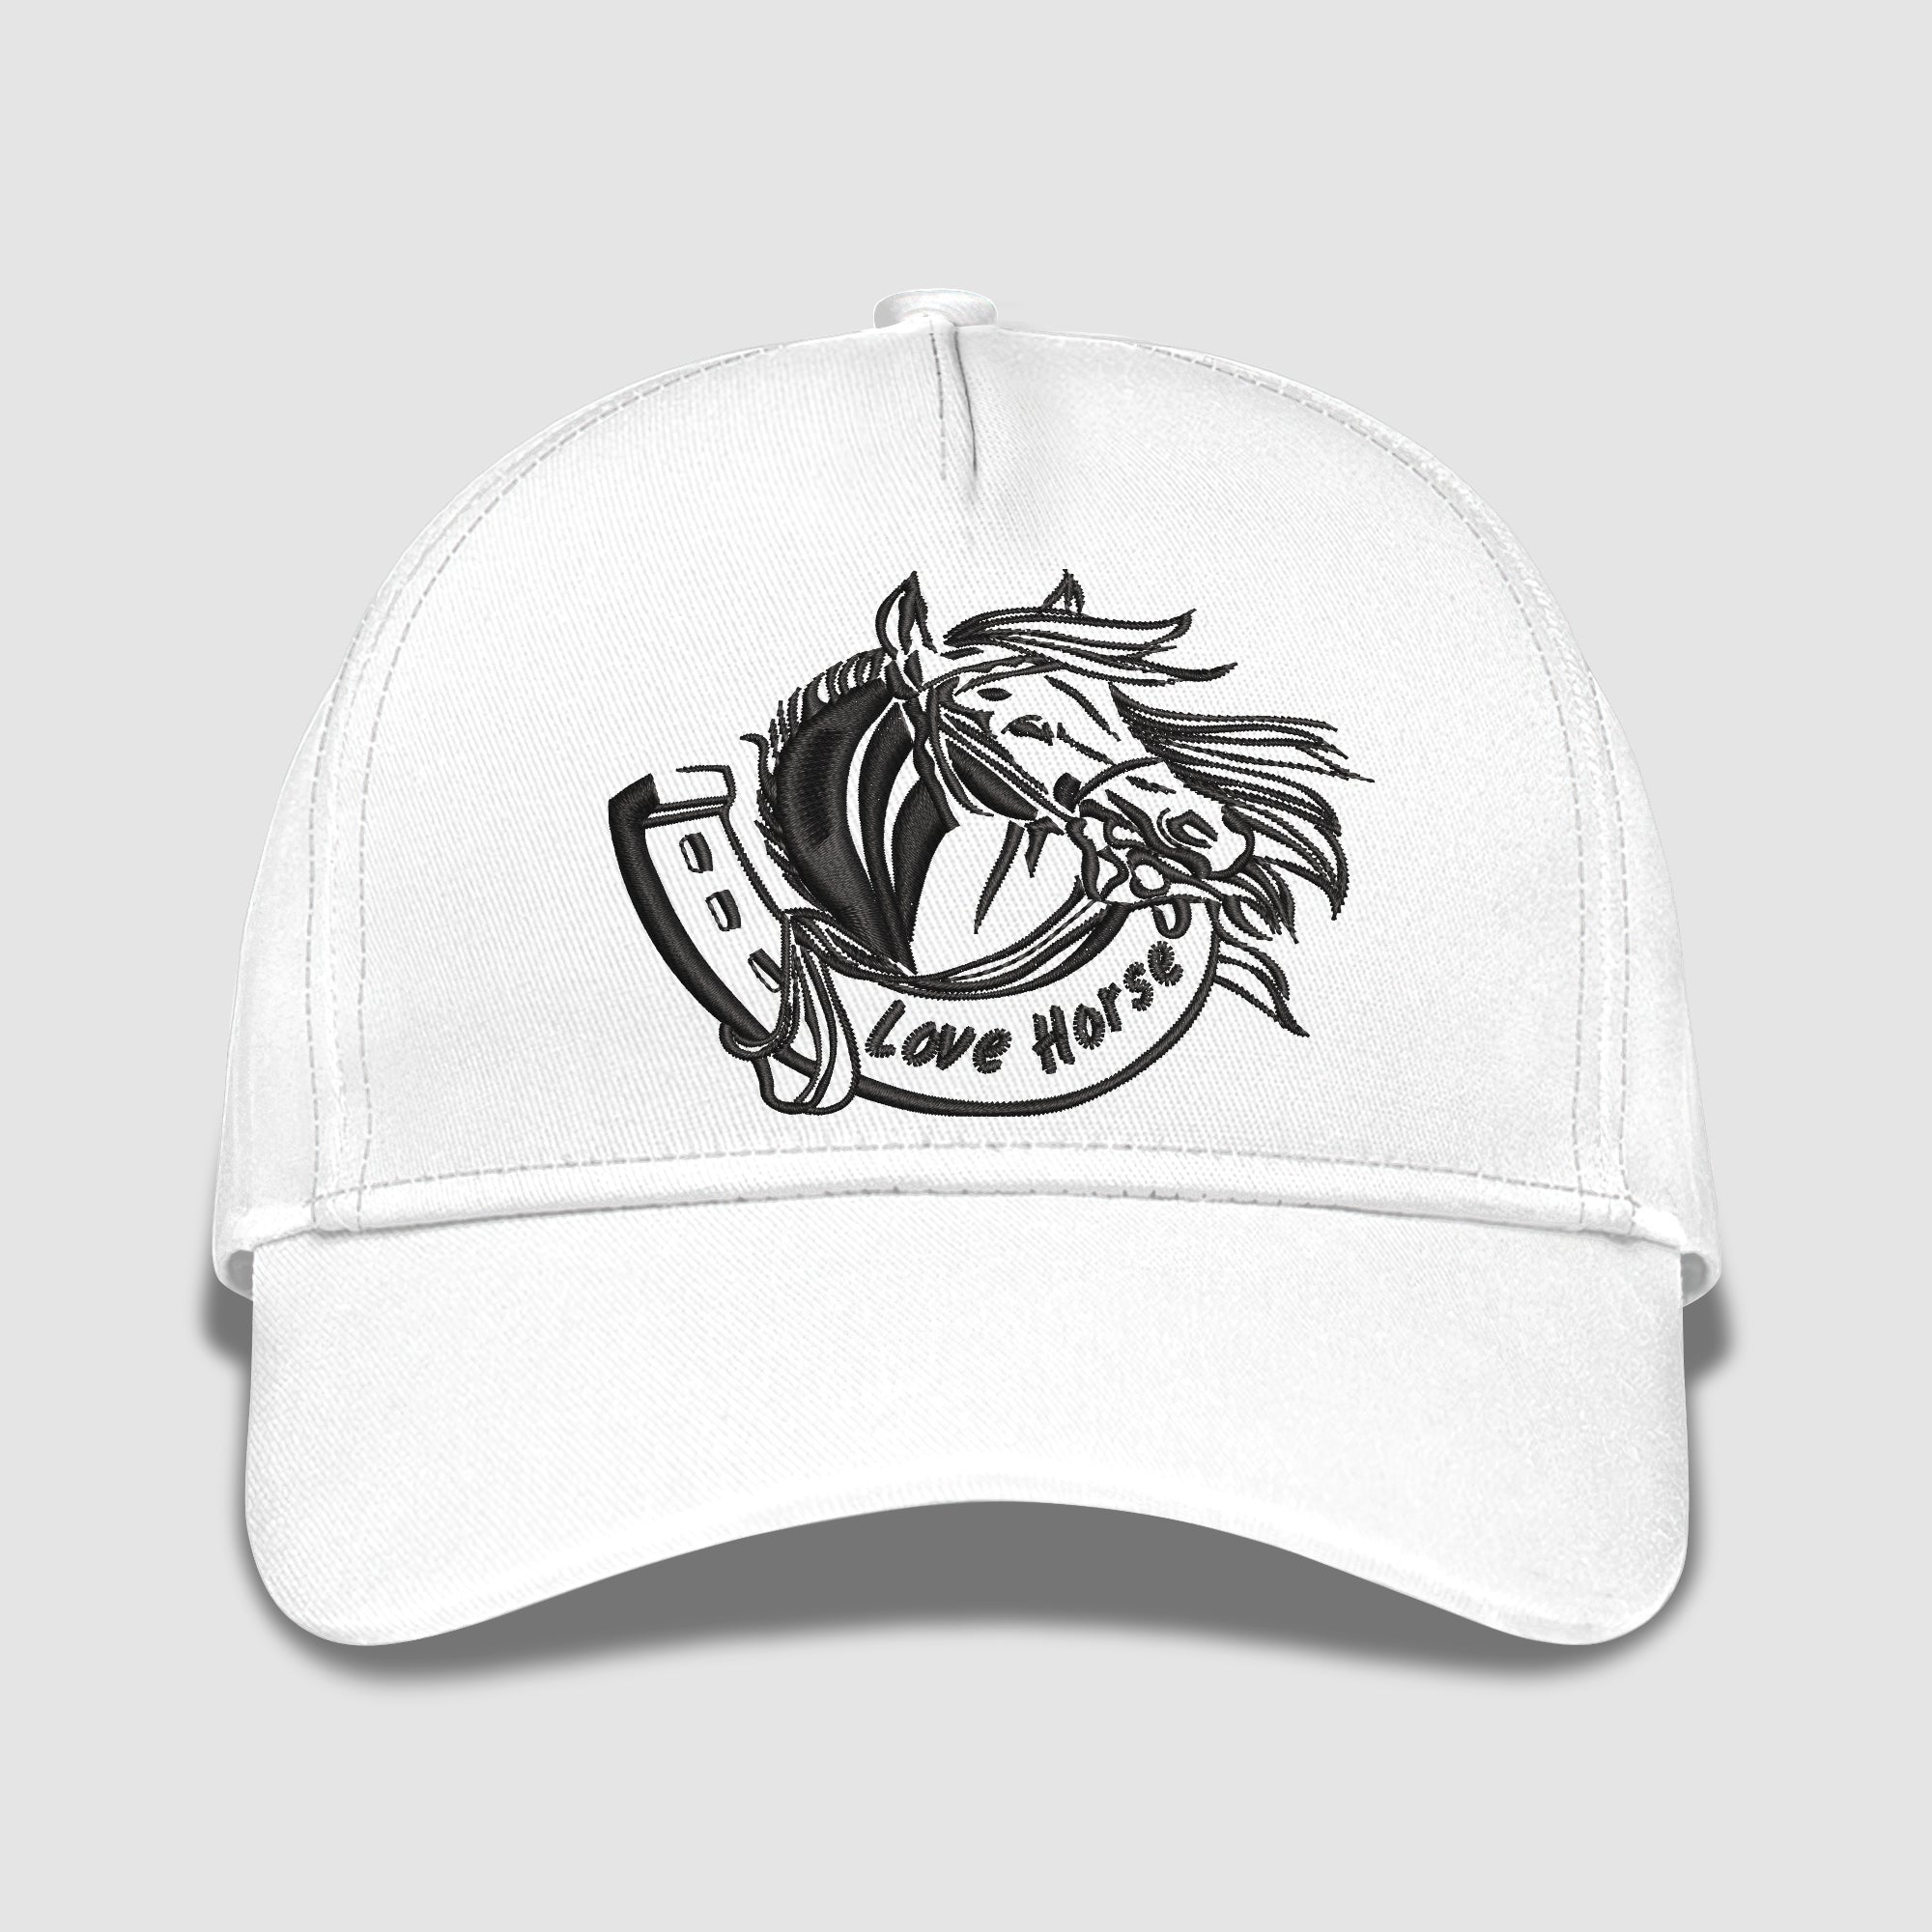 Love Horse Embroidered Baseball Caps